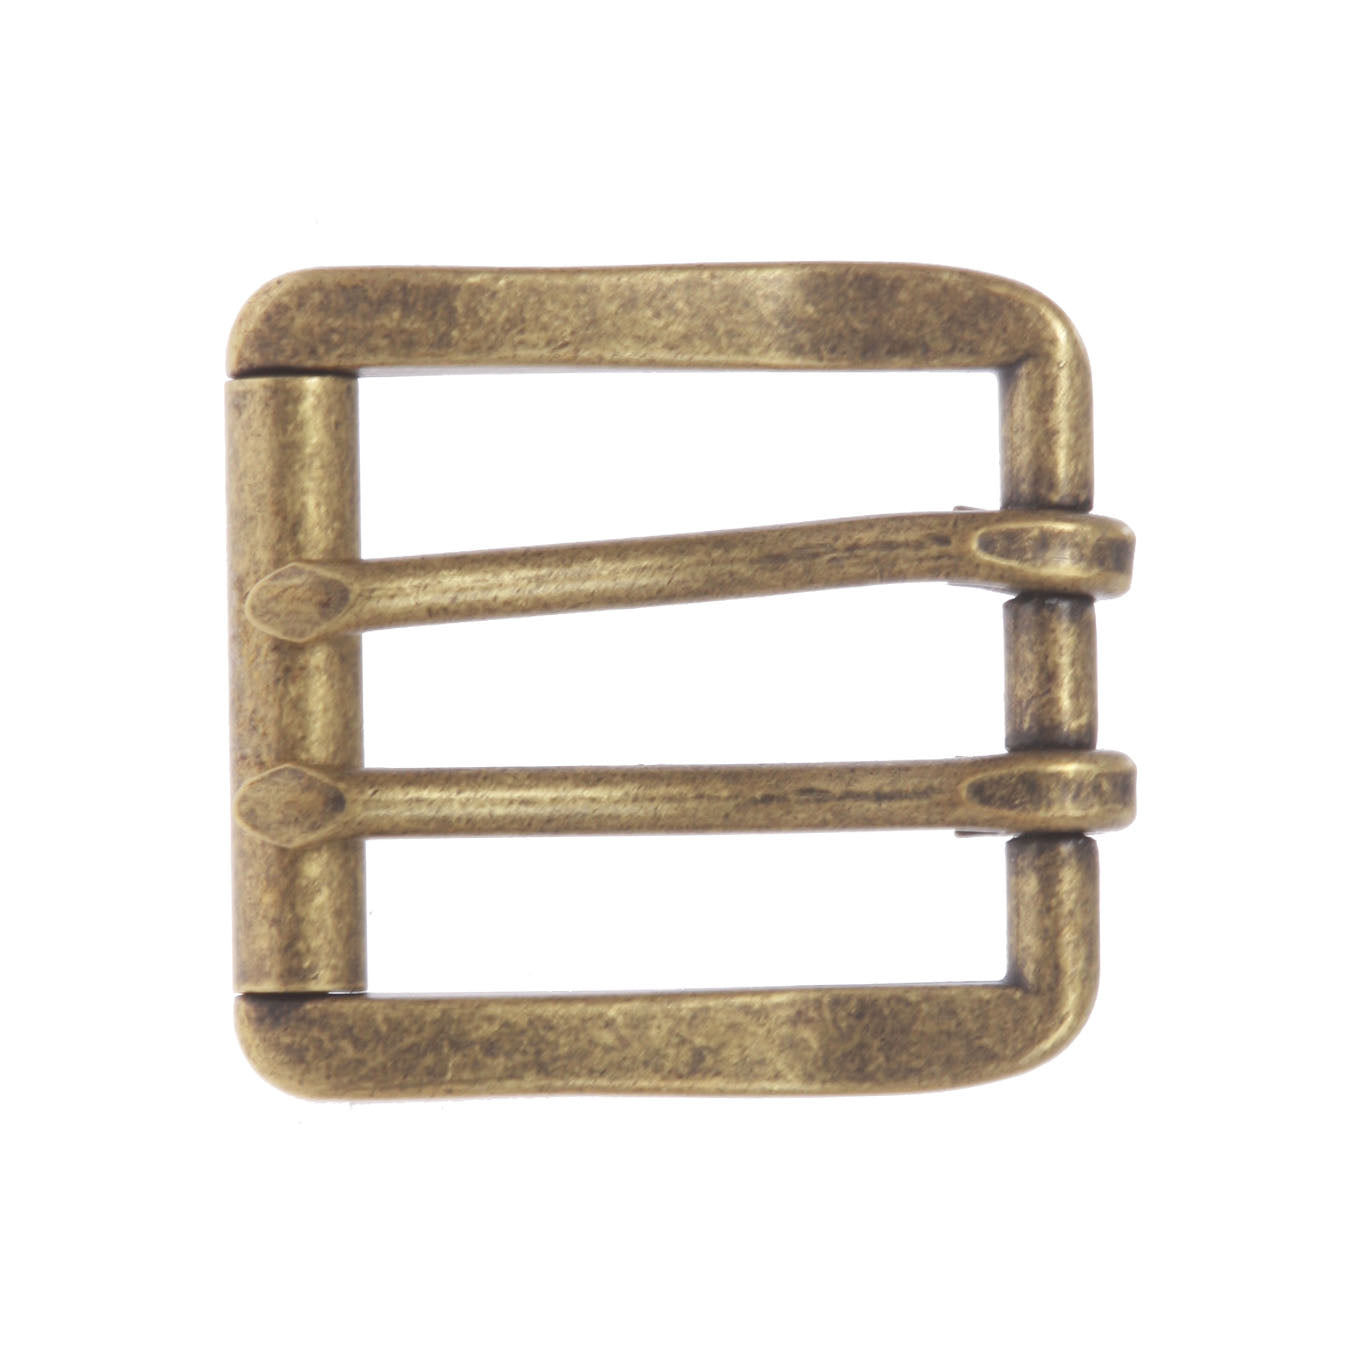 1 1/2" (38 mm) Double Prong Roller Solid Brass Belt Buckle